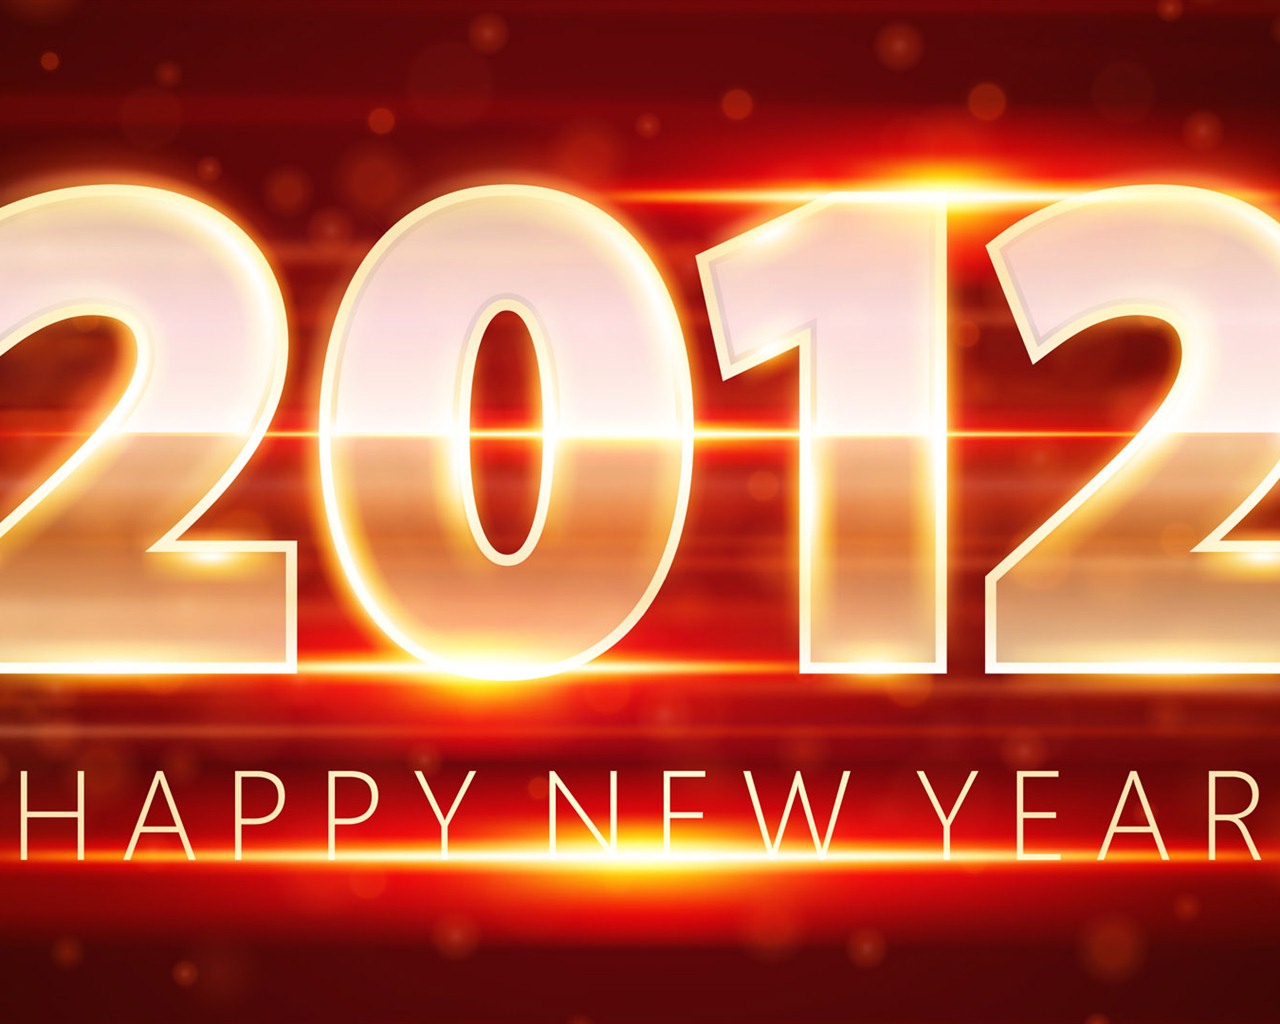 2012 New Year wallpapers (1) #2 - 1280x1024